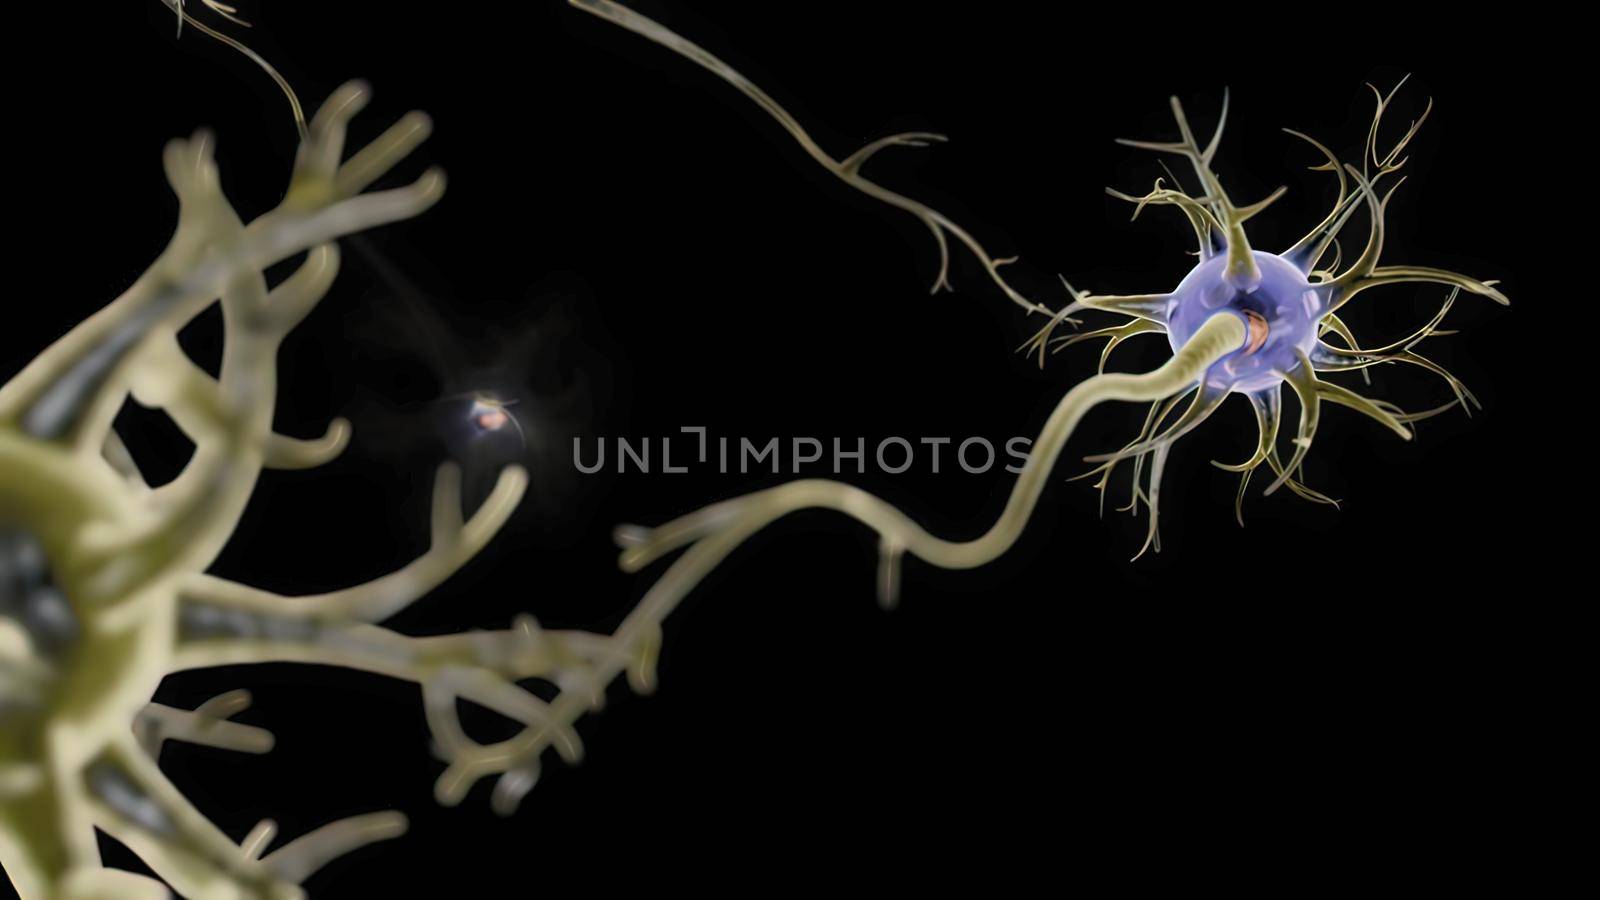 Neuronal and Synapse Activity illustration. Neurons in the head, neuroactivity, synapses, neurotransmitters, brain, axons. Electrical impulses inside the human brain. 3D illustration